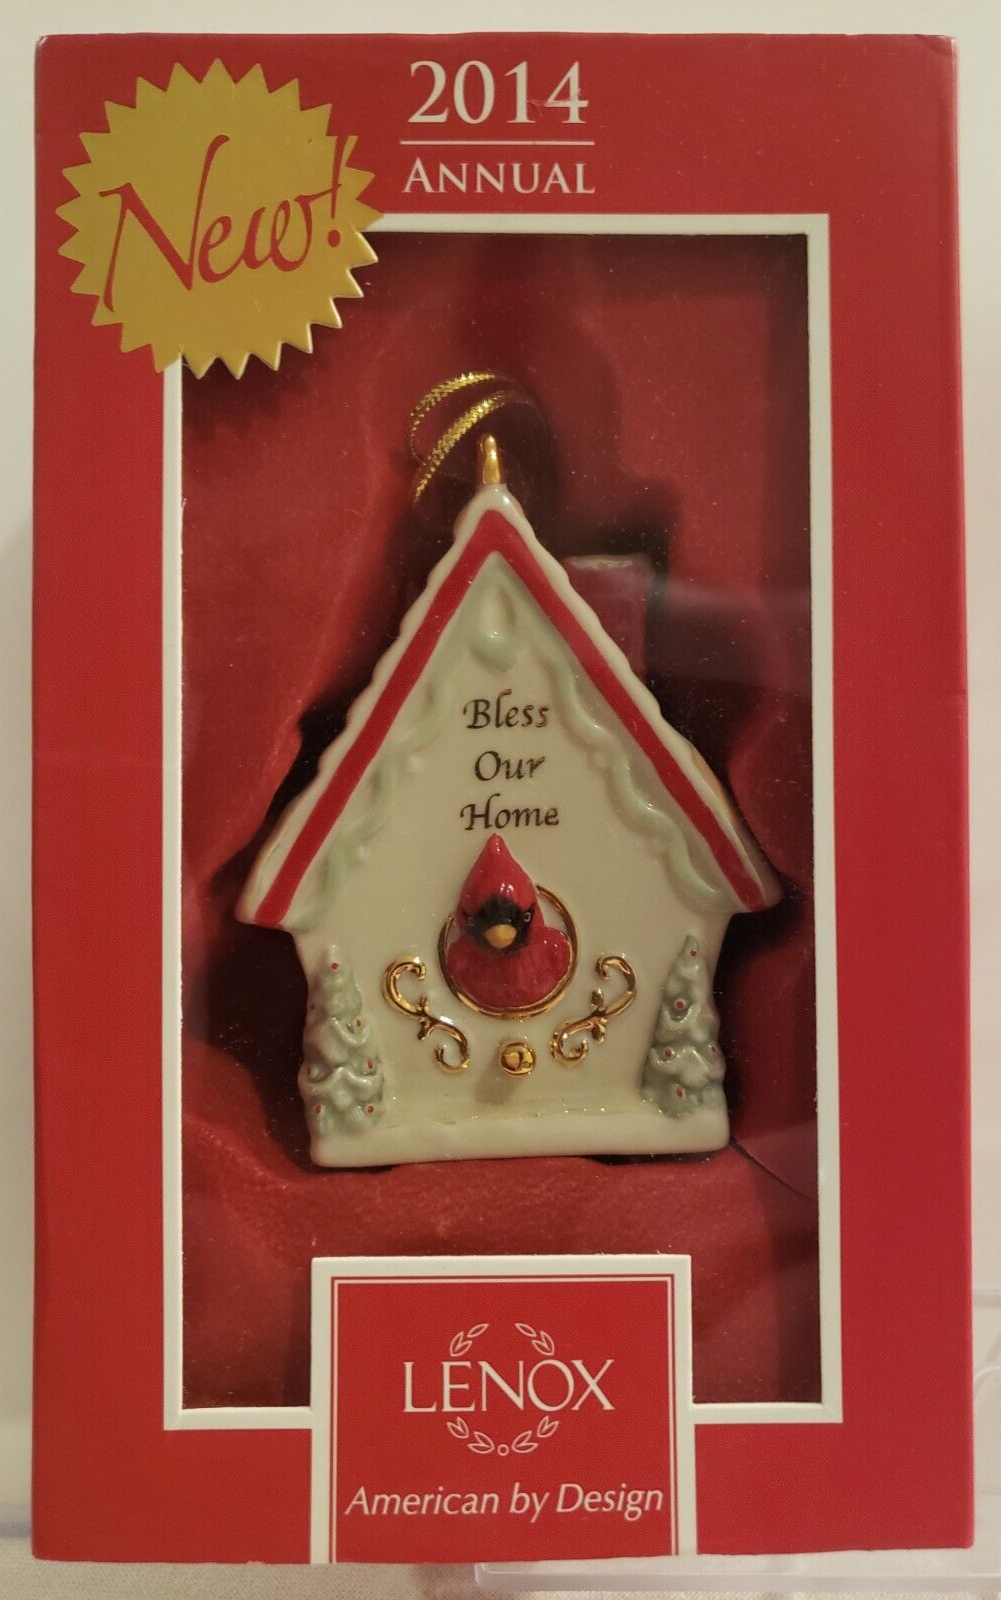 CHRISTMAS ORNAMENT by LENOX - "BLESS OUR HOME BIRDHOUSE" - AMERICAN BY DESIGN - $19.99